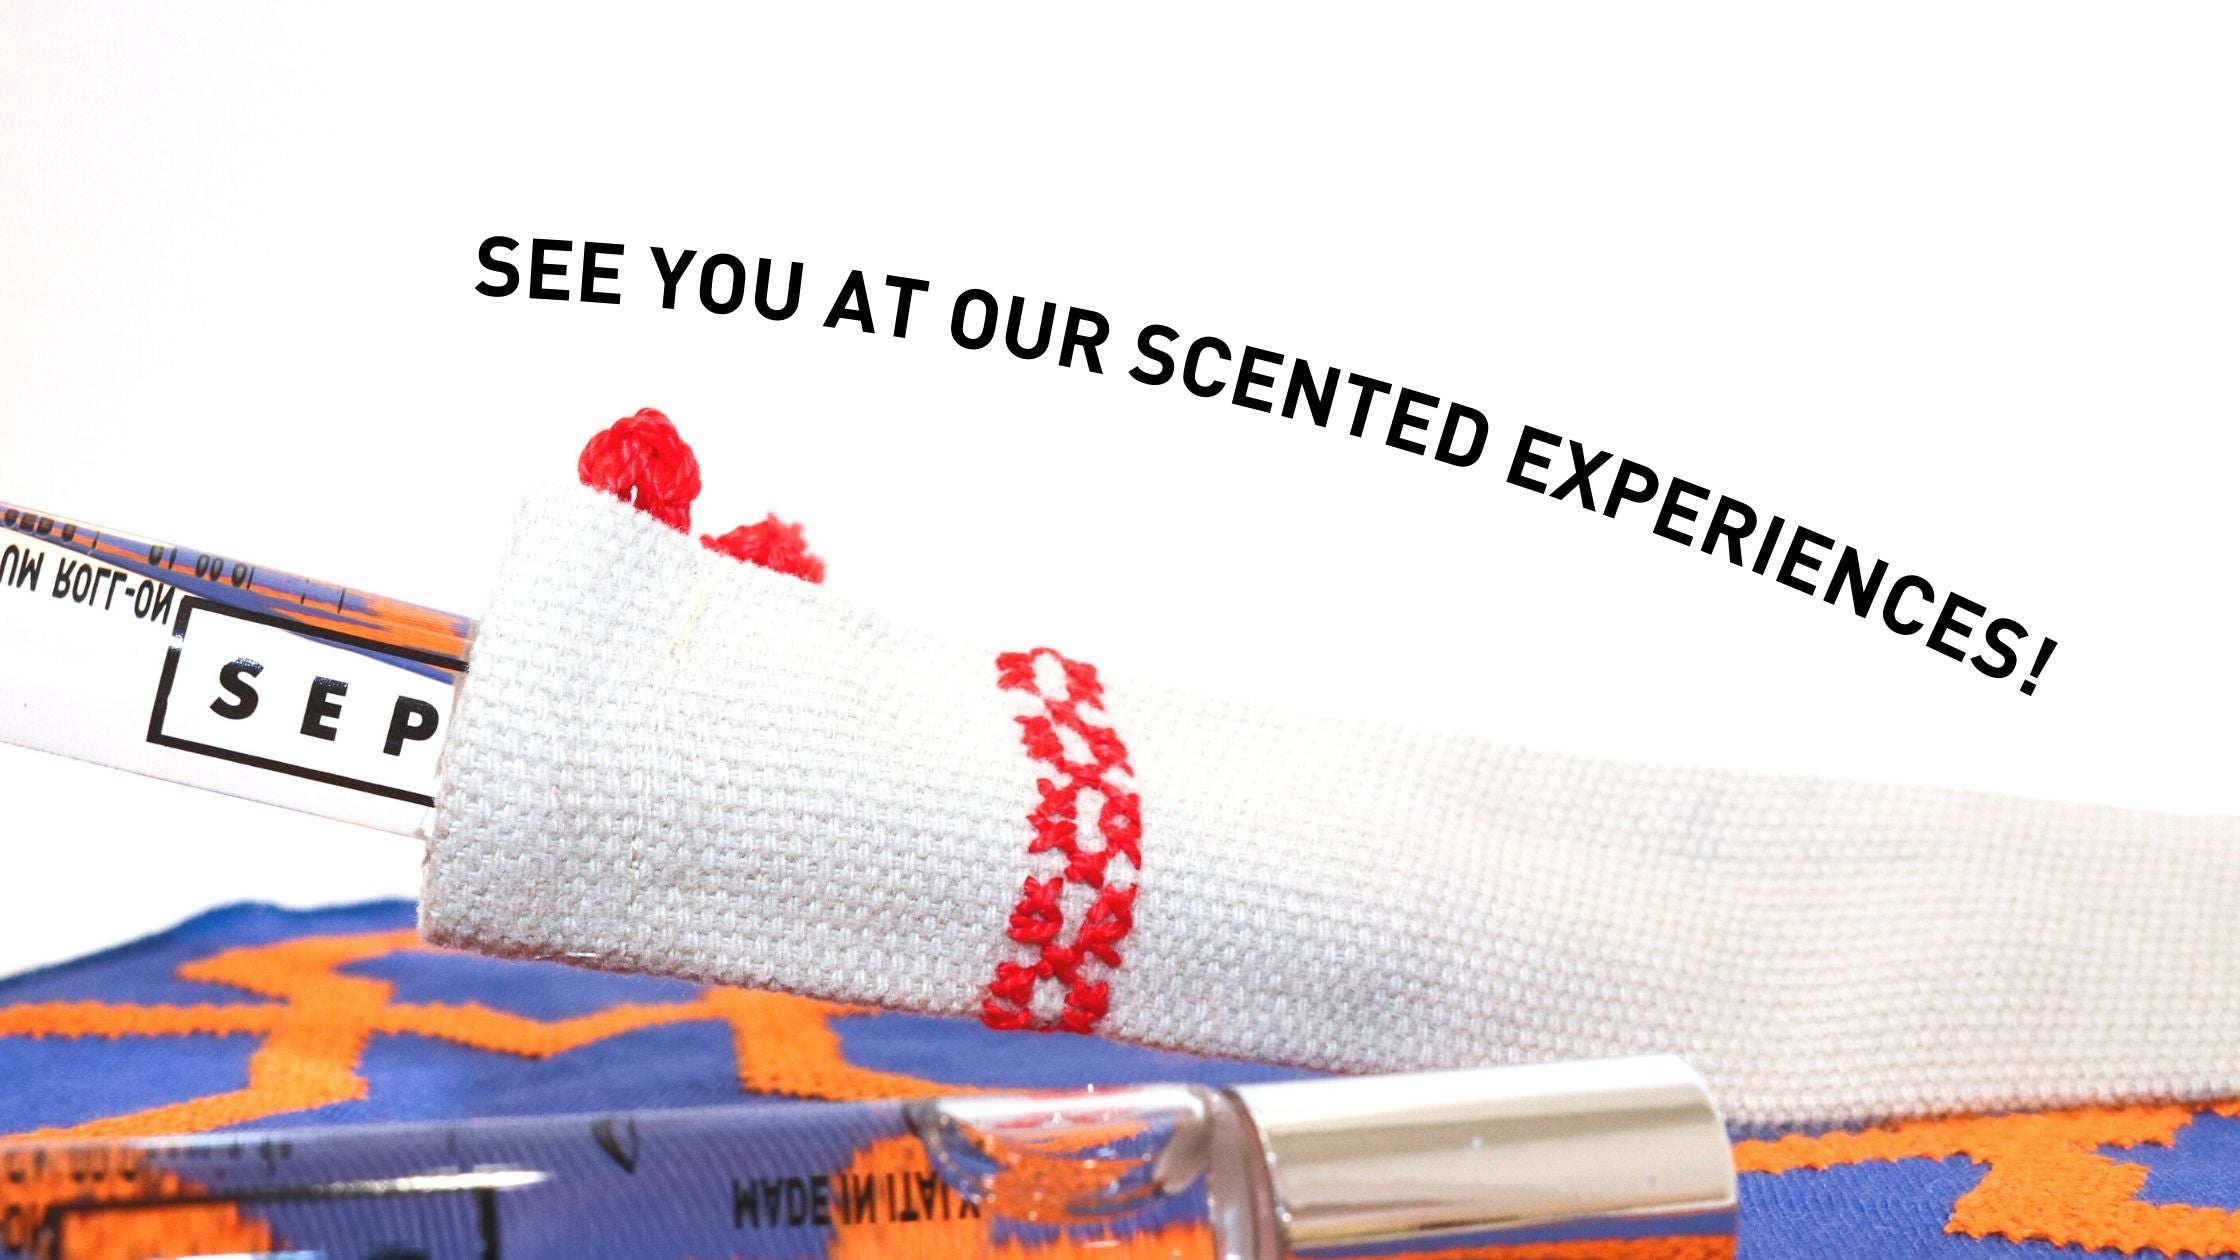 SEE YOU AT OUR SCENTED EXPERIENCES!